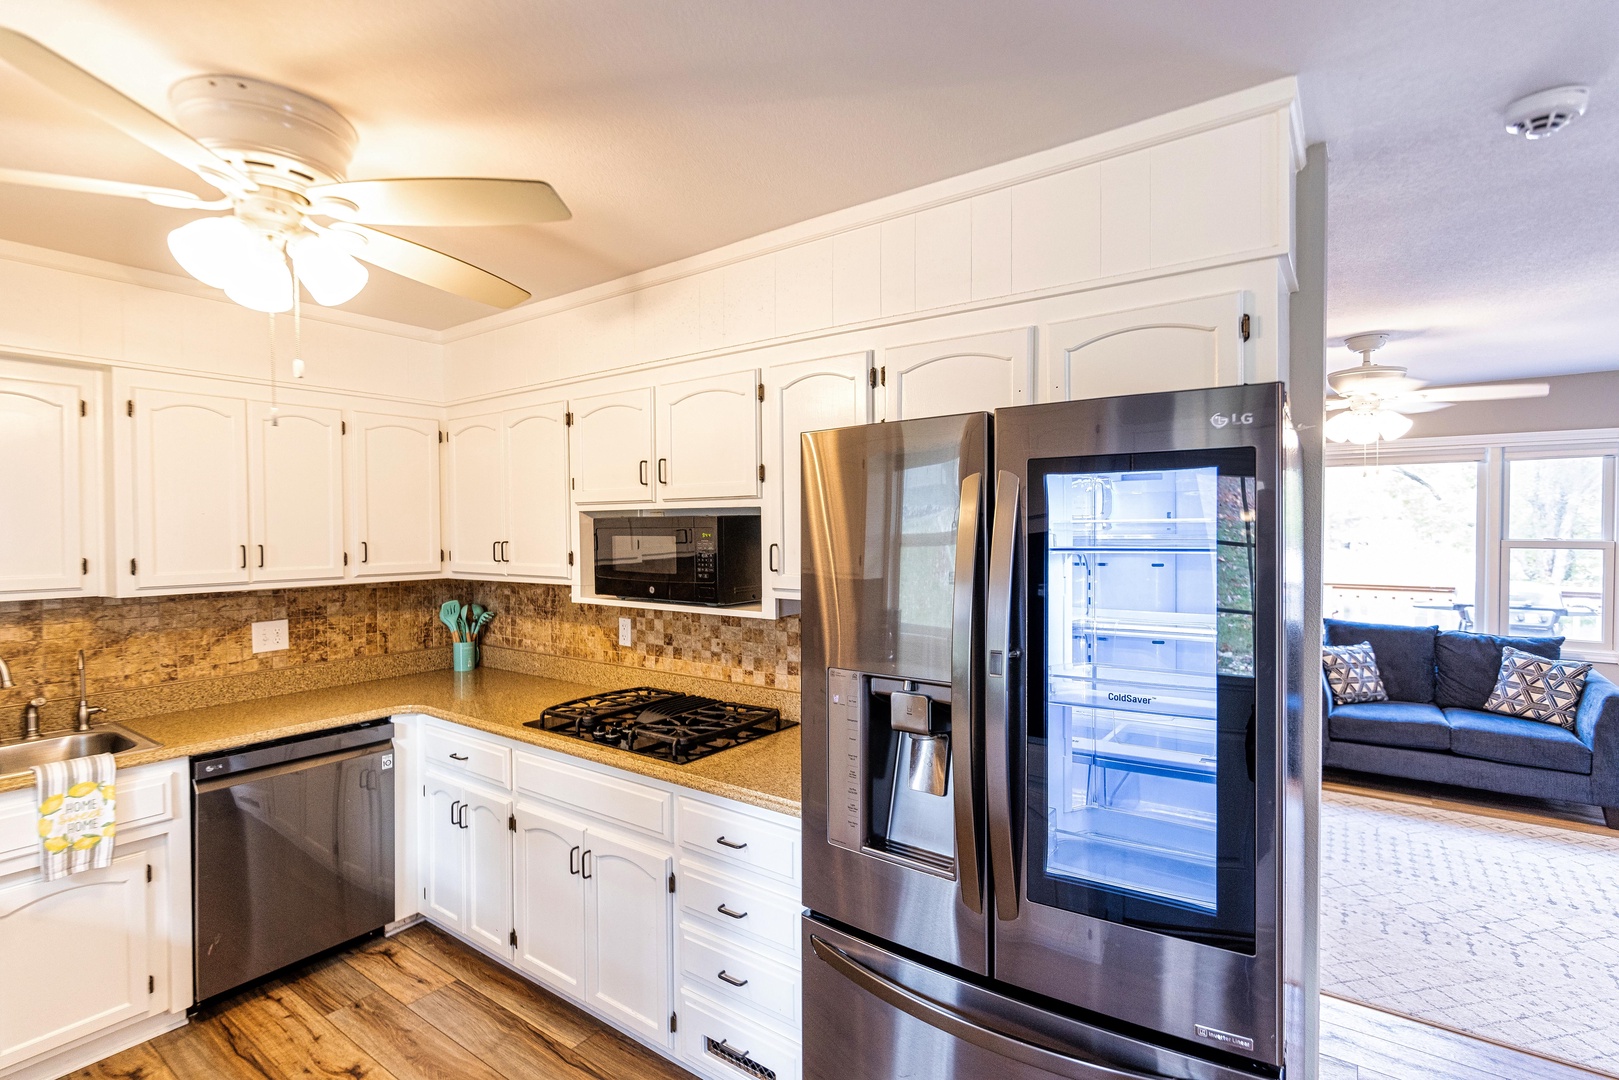 The kitchen offers ample space & all the storage of home